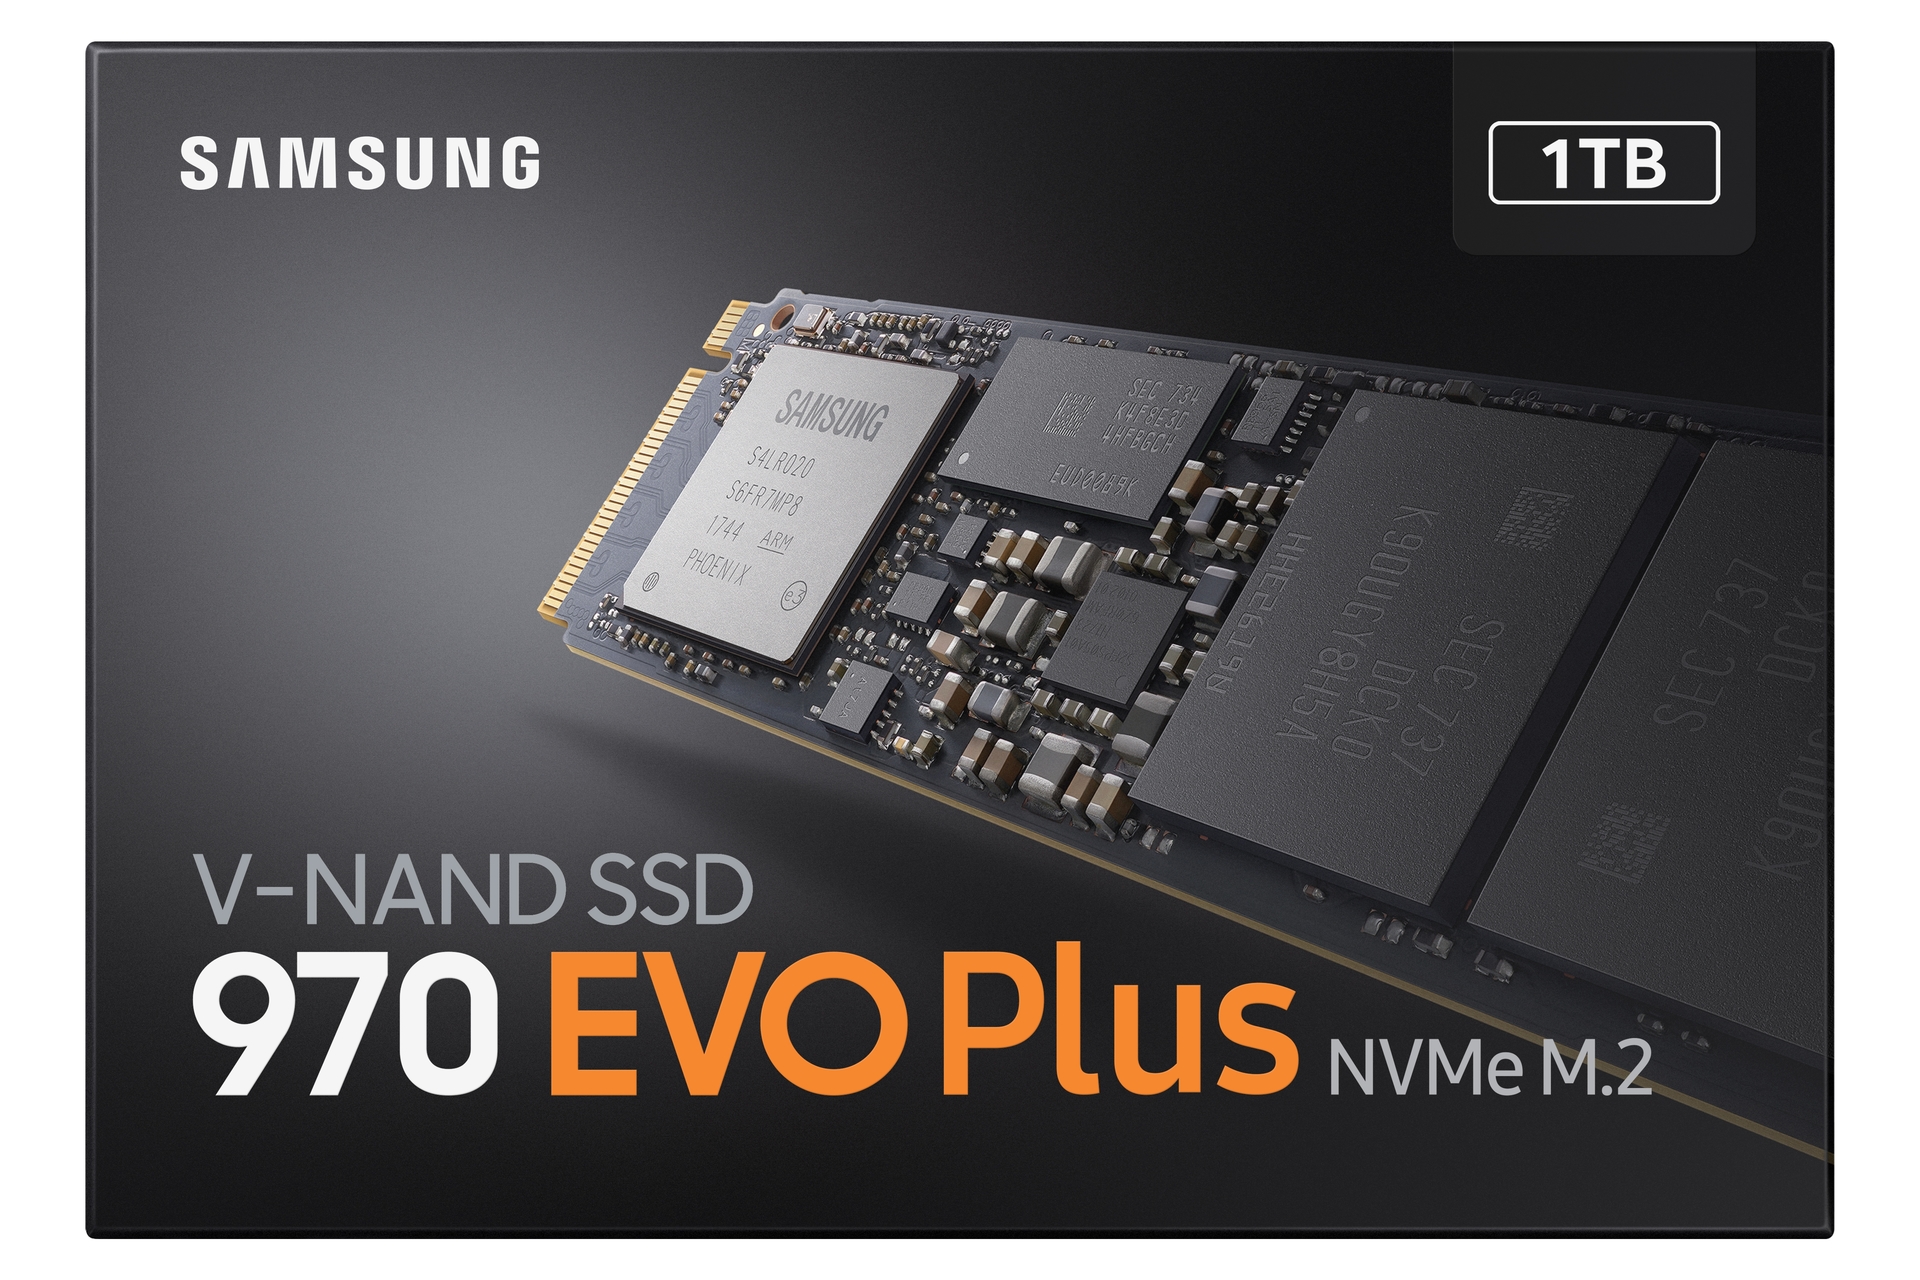 Samsung 970 EVO Plus SSD 1TB - M.2 NVMe Interface Internal Solid State Drive With V-NAND Technology (MZ-V7S1T0B/AM)